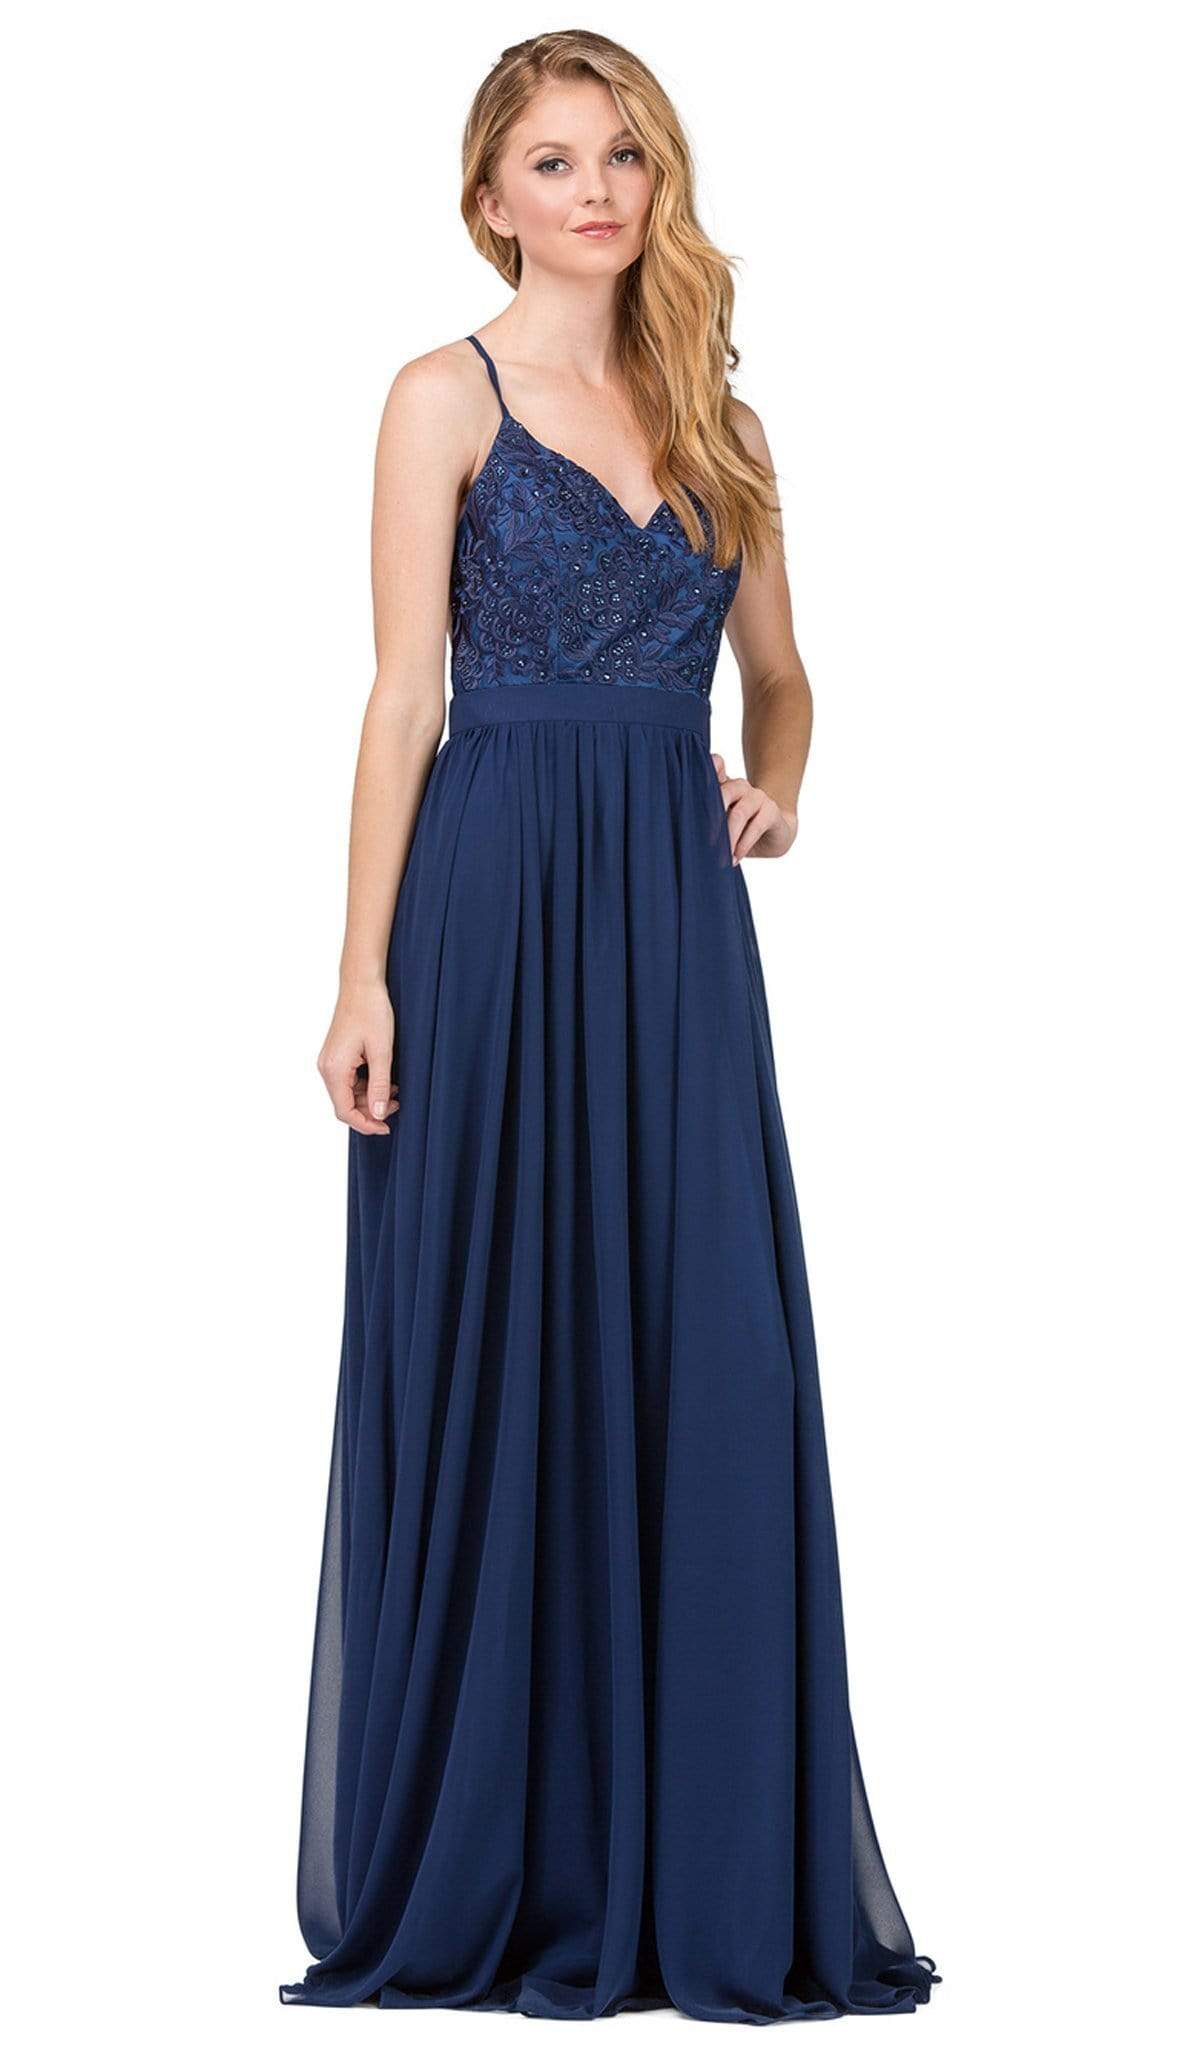 Dancing Queen - 9850 Beaded Lace V-neck A-line Prom Dress Prom Dresses XS / Navy